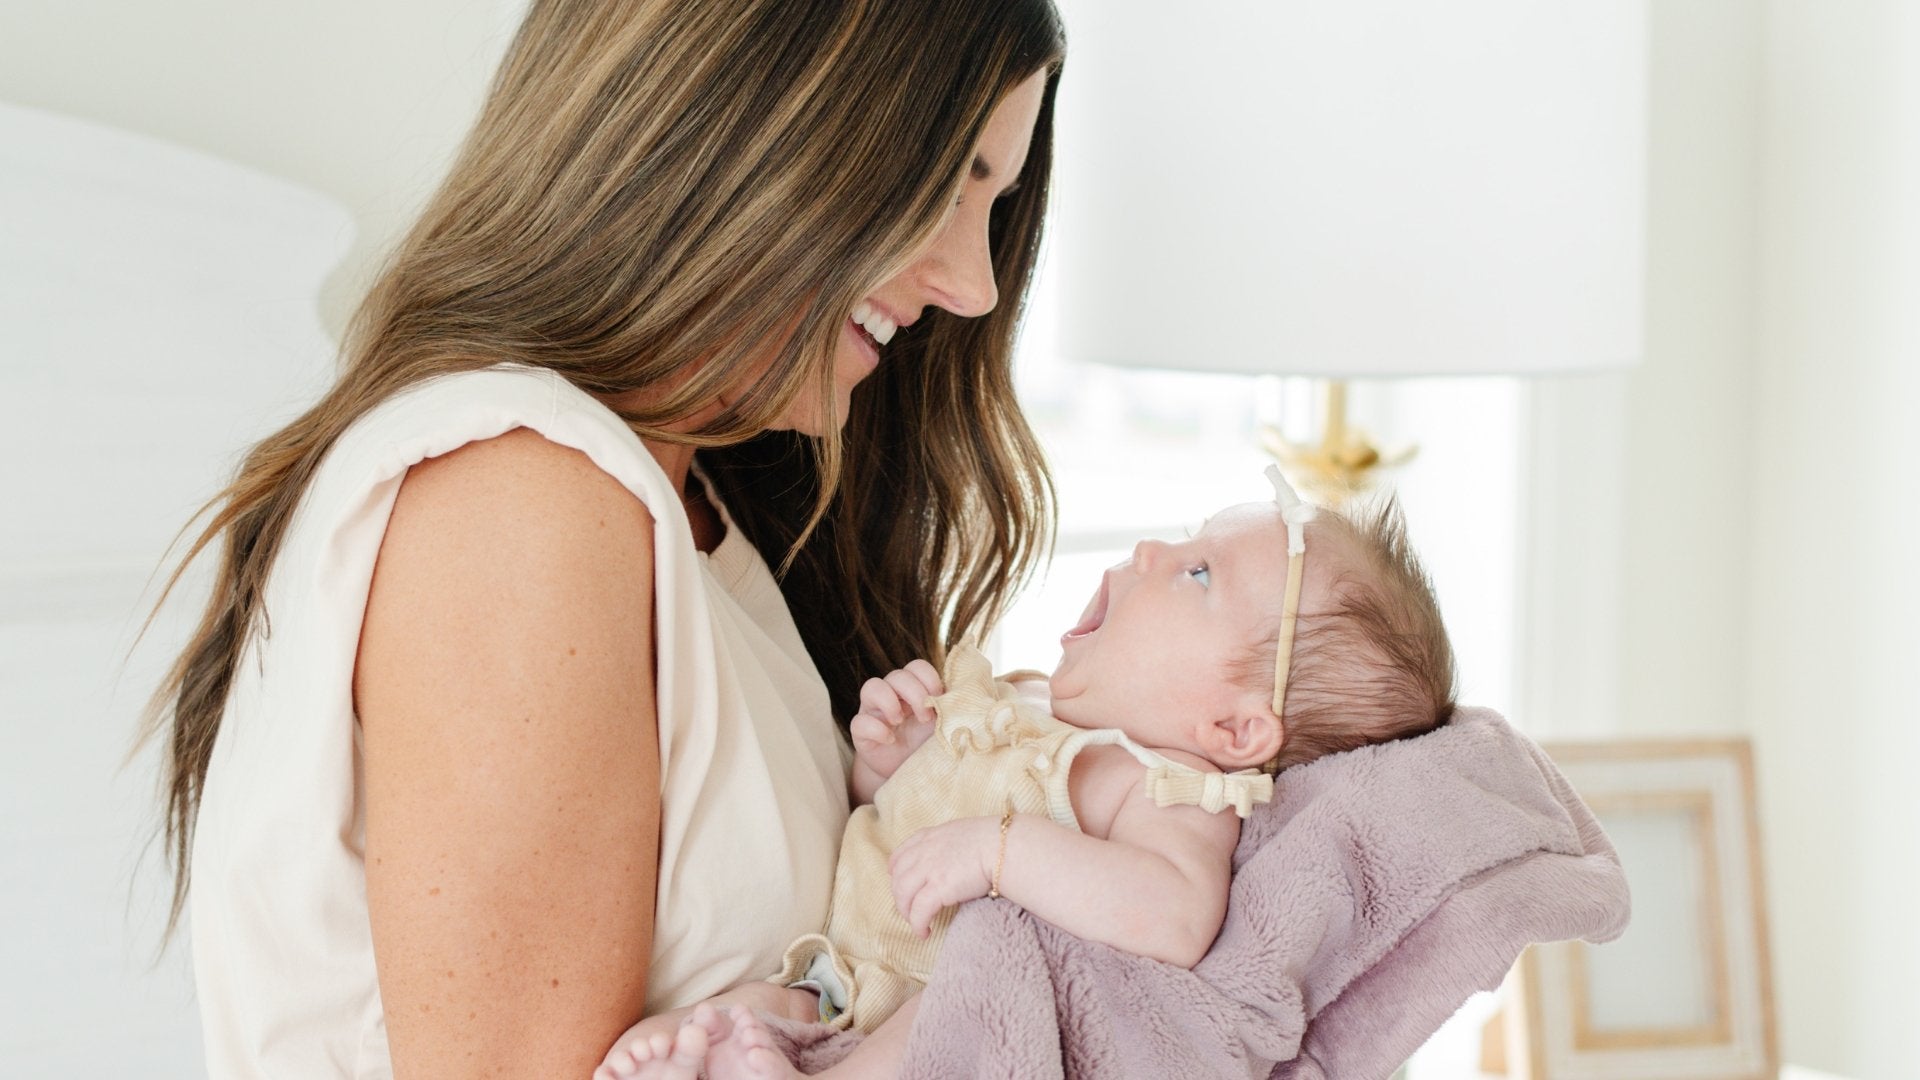 Newborn Essentials: What You REALLY Need as a First Time Mom